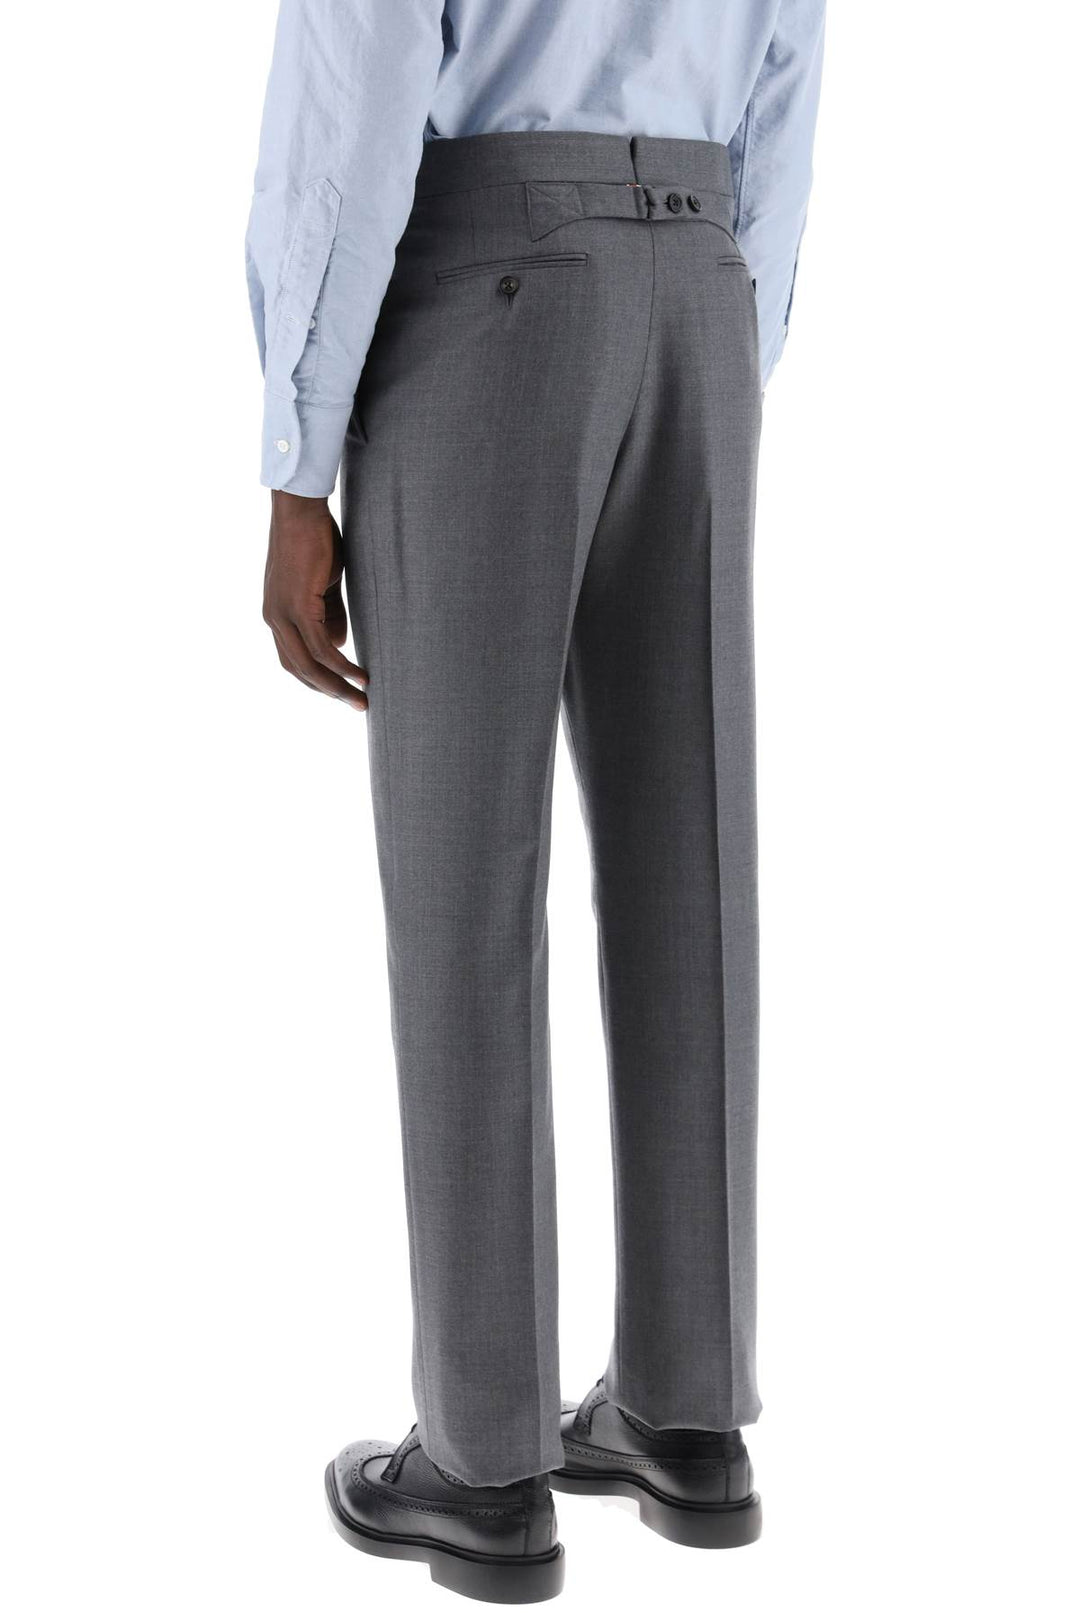 Thom Browne Classic Twill Trousers For Men   Grey